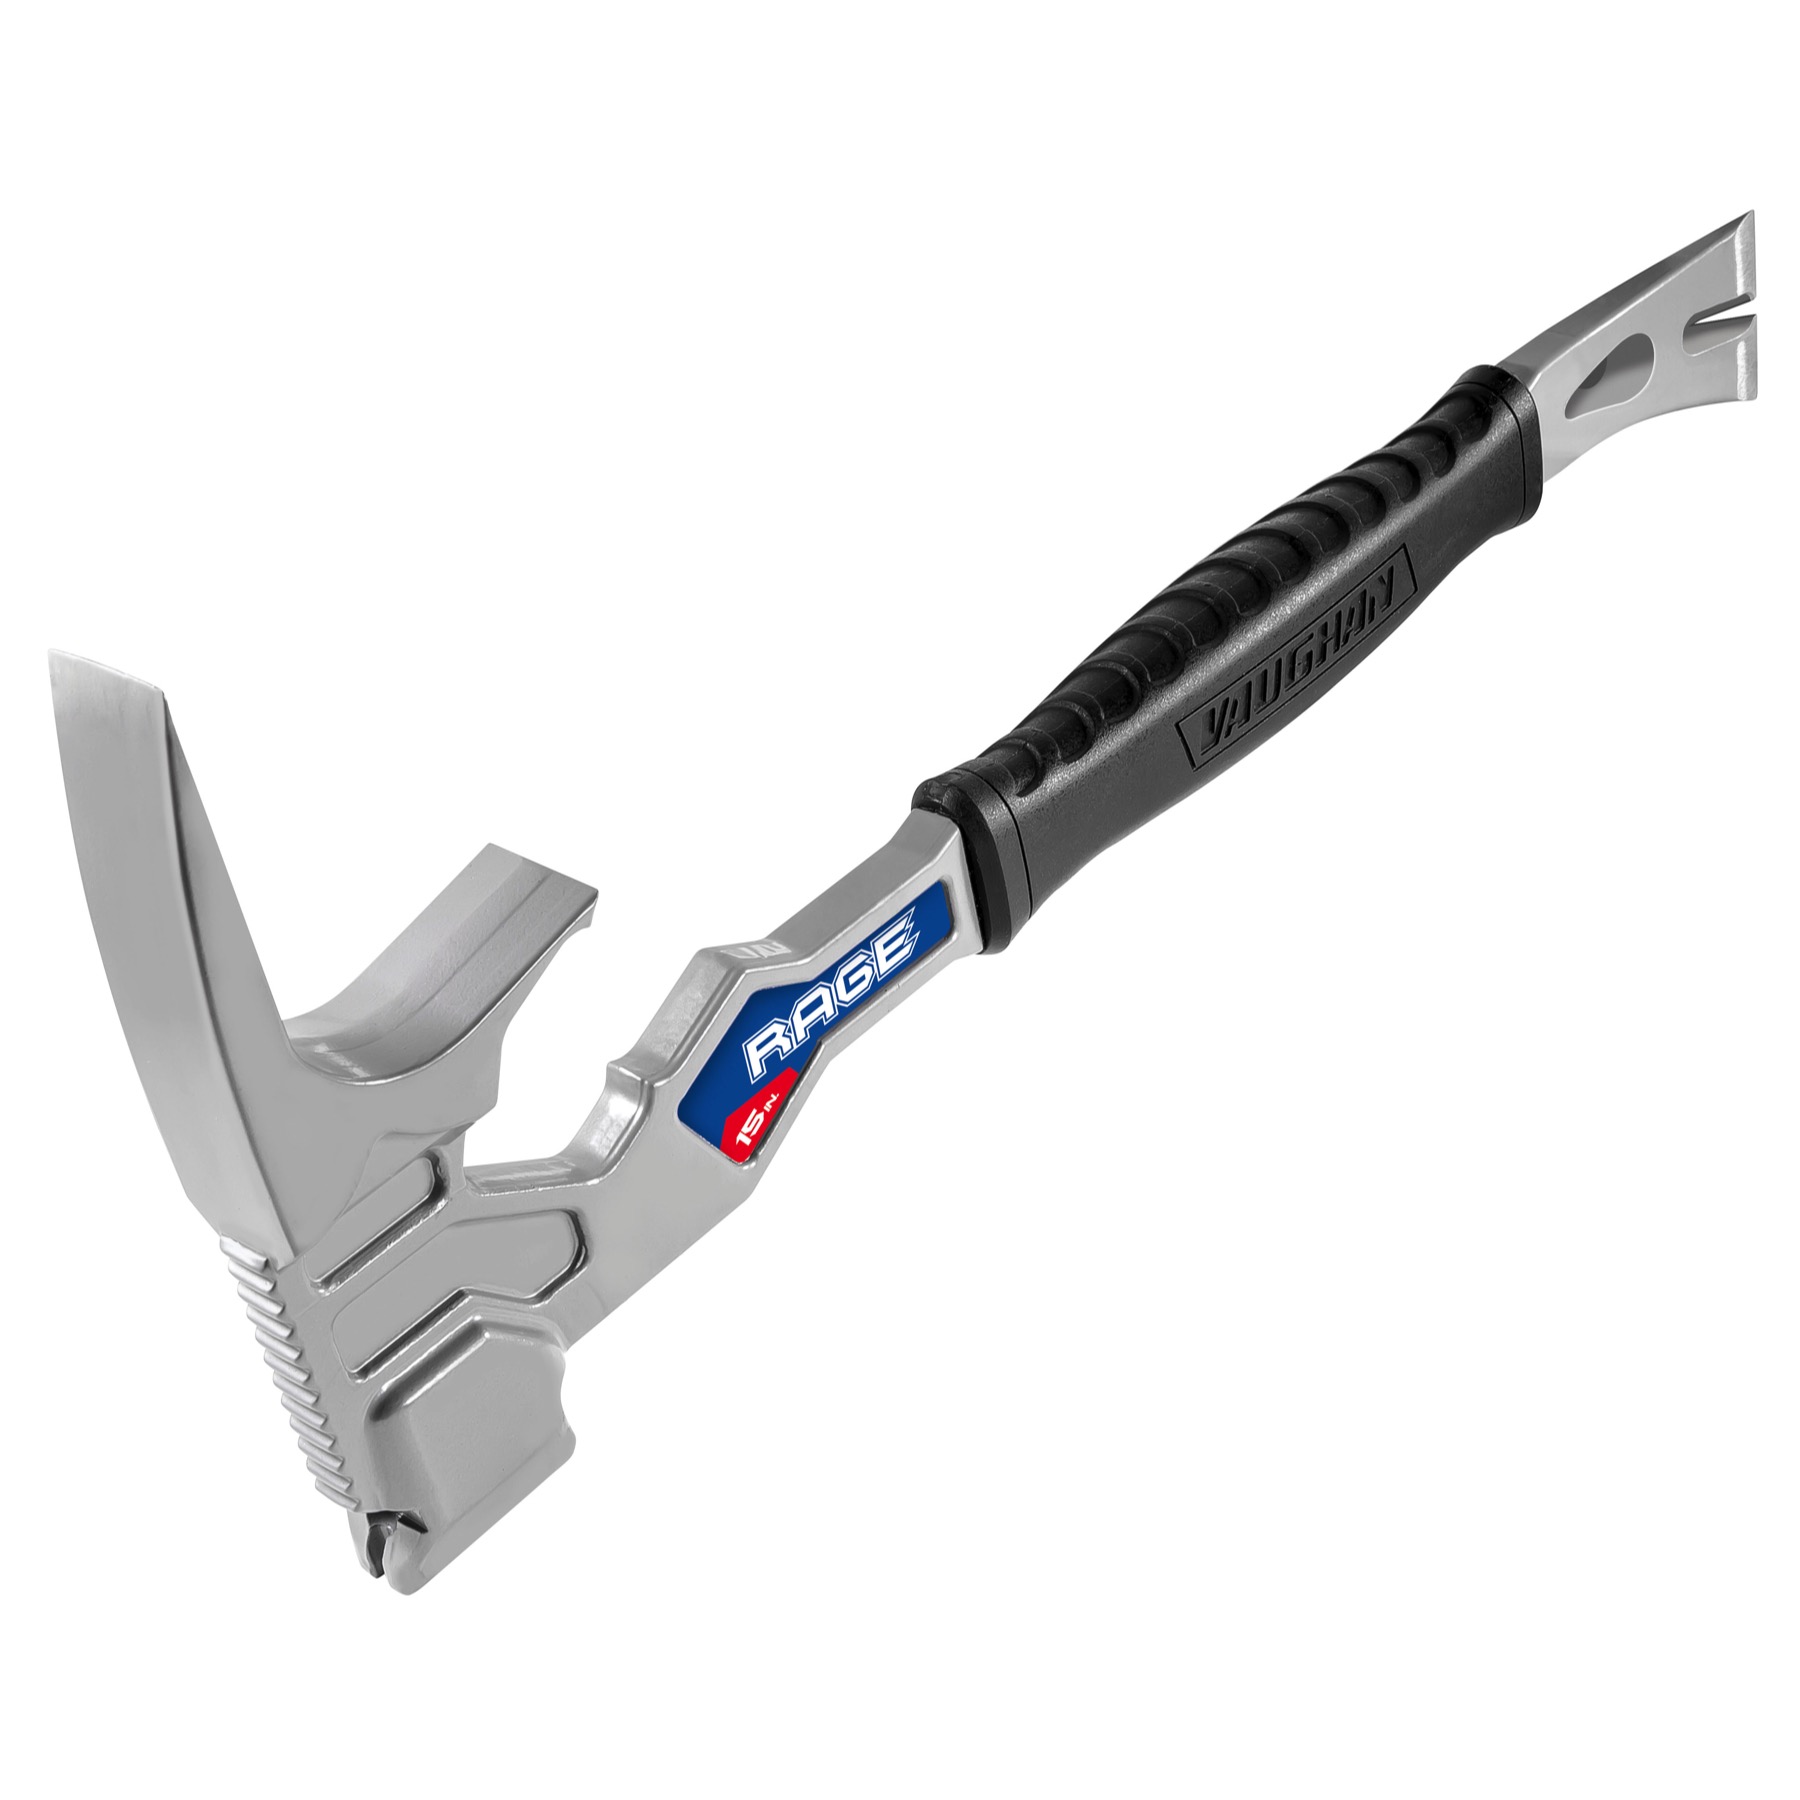 Vaughan 15 Inch Multi-Function Demolition Tool with Pry Bar and Hammer - 050042